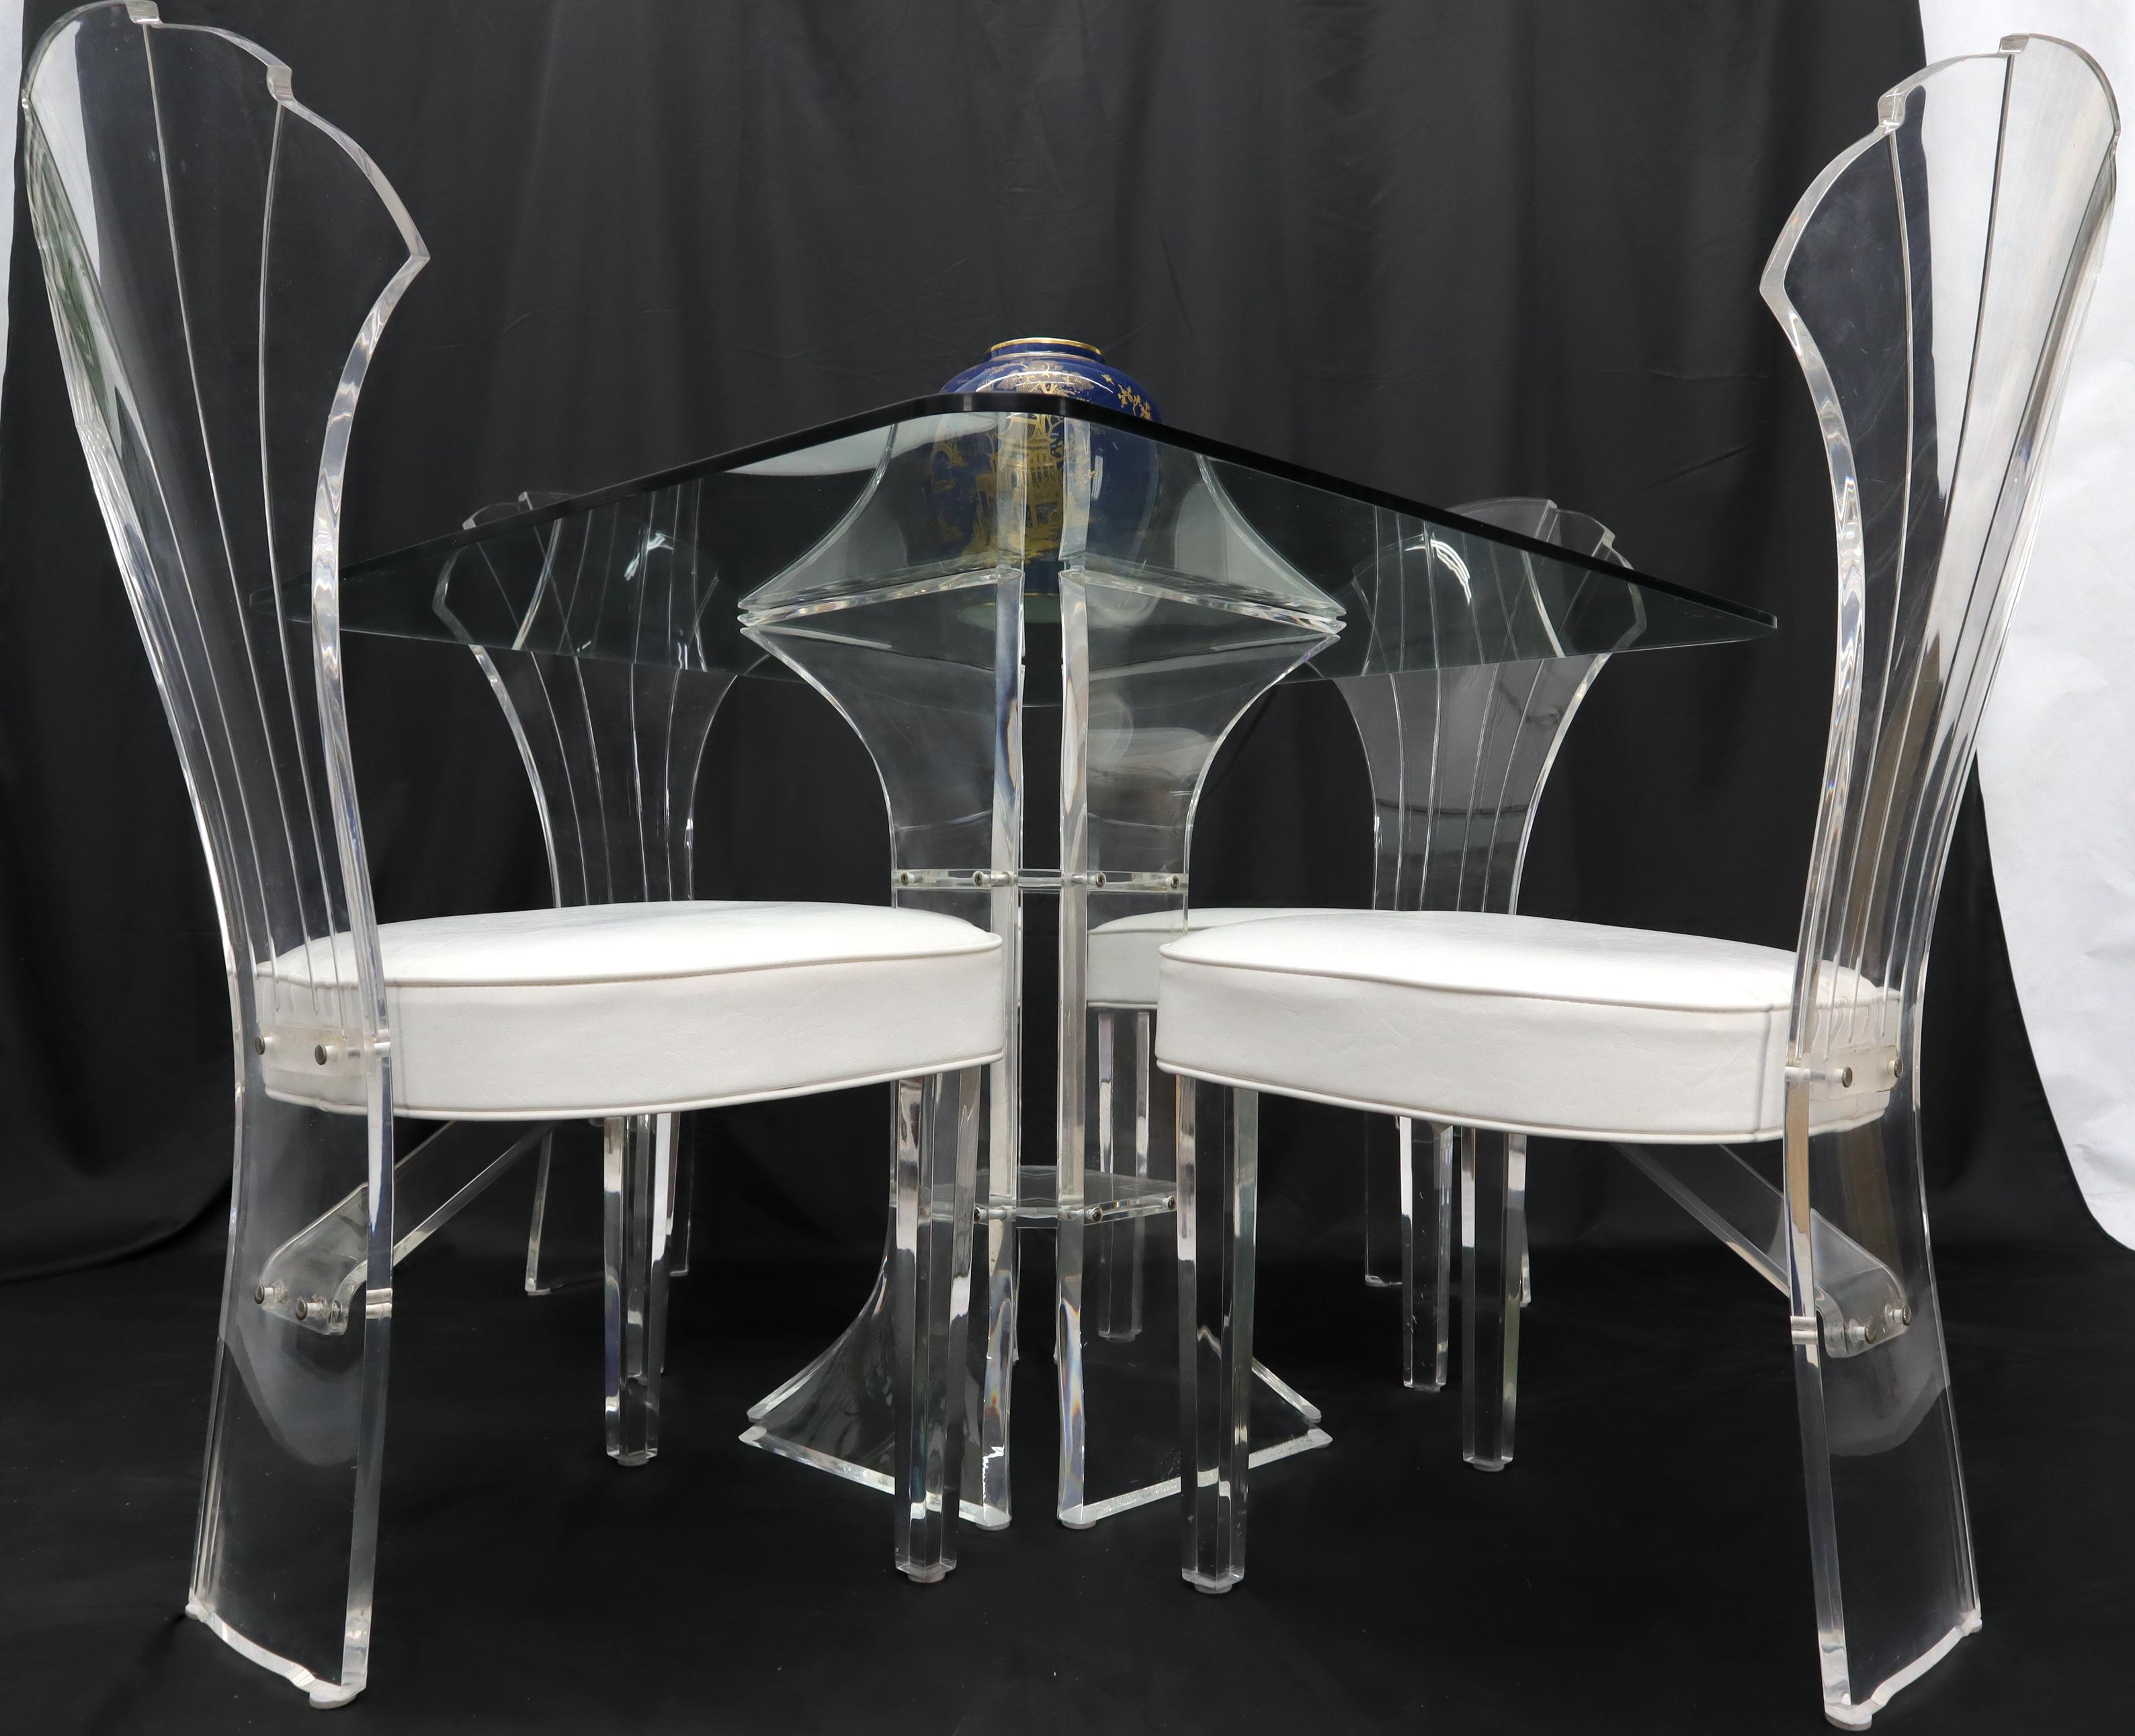 square glass dining table for 4